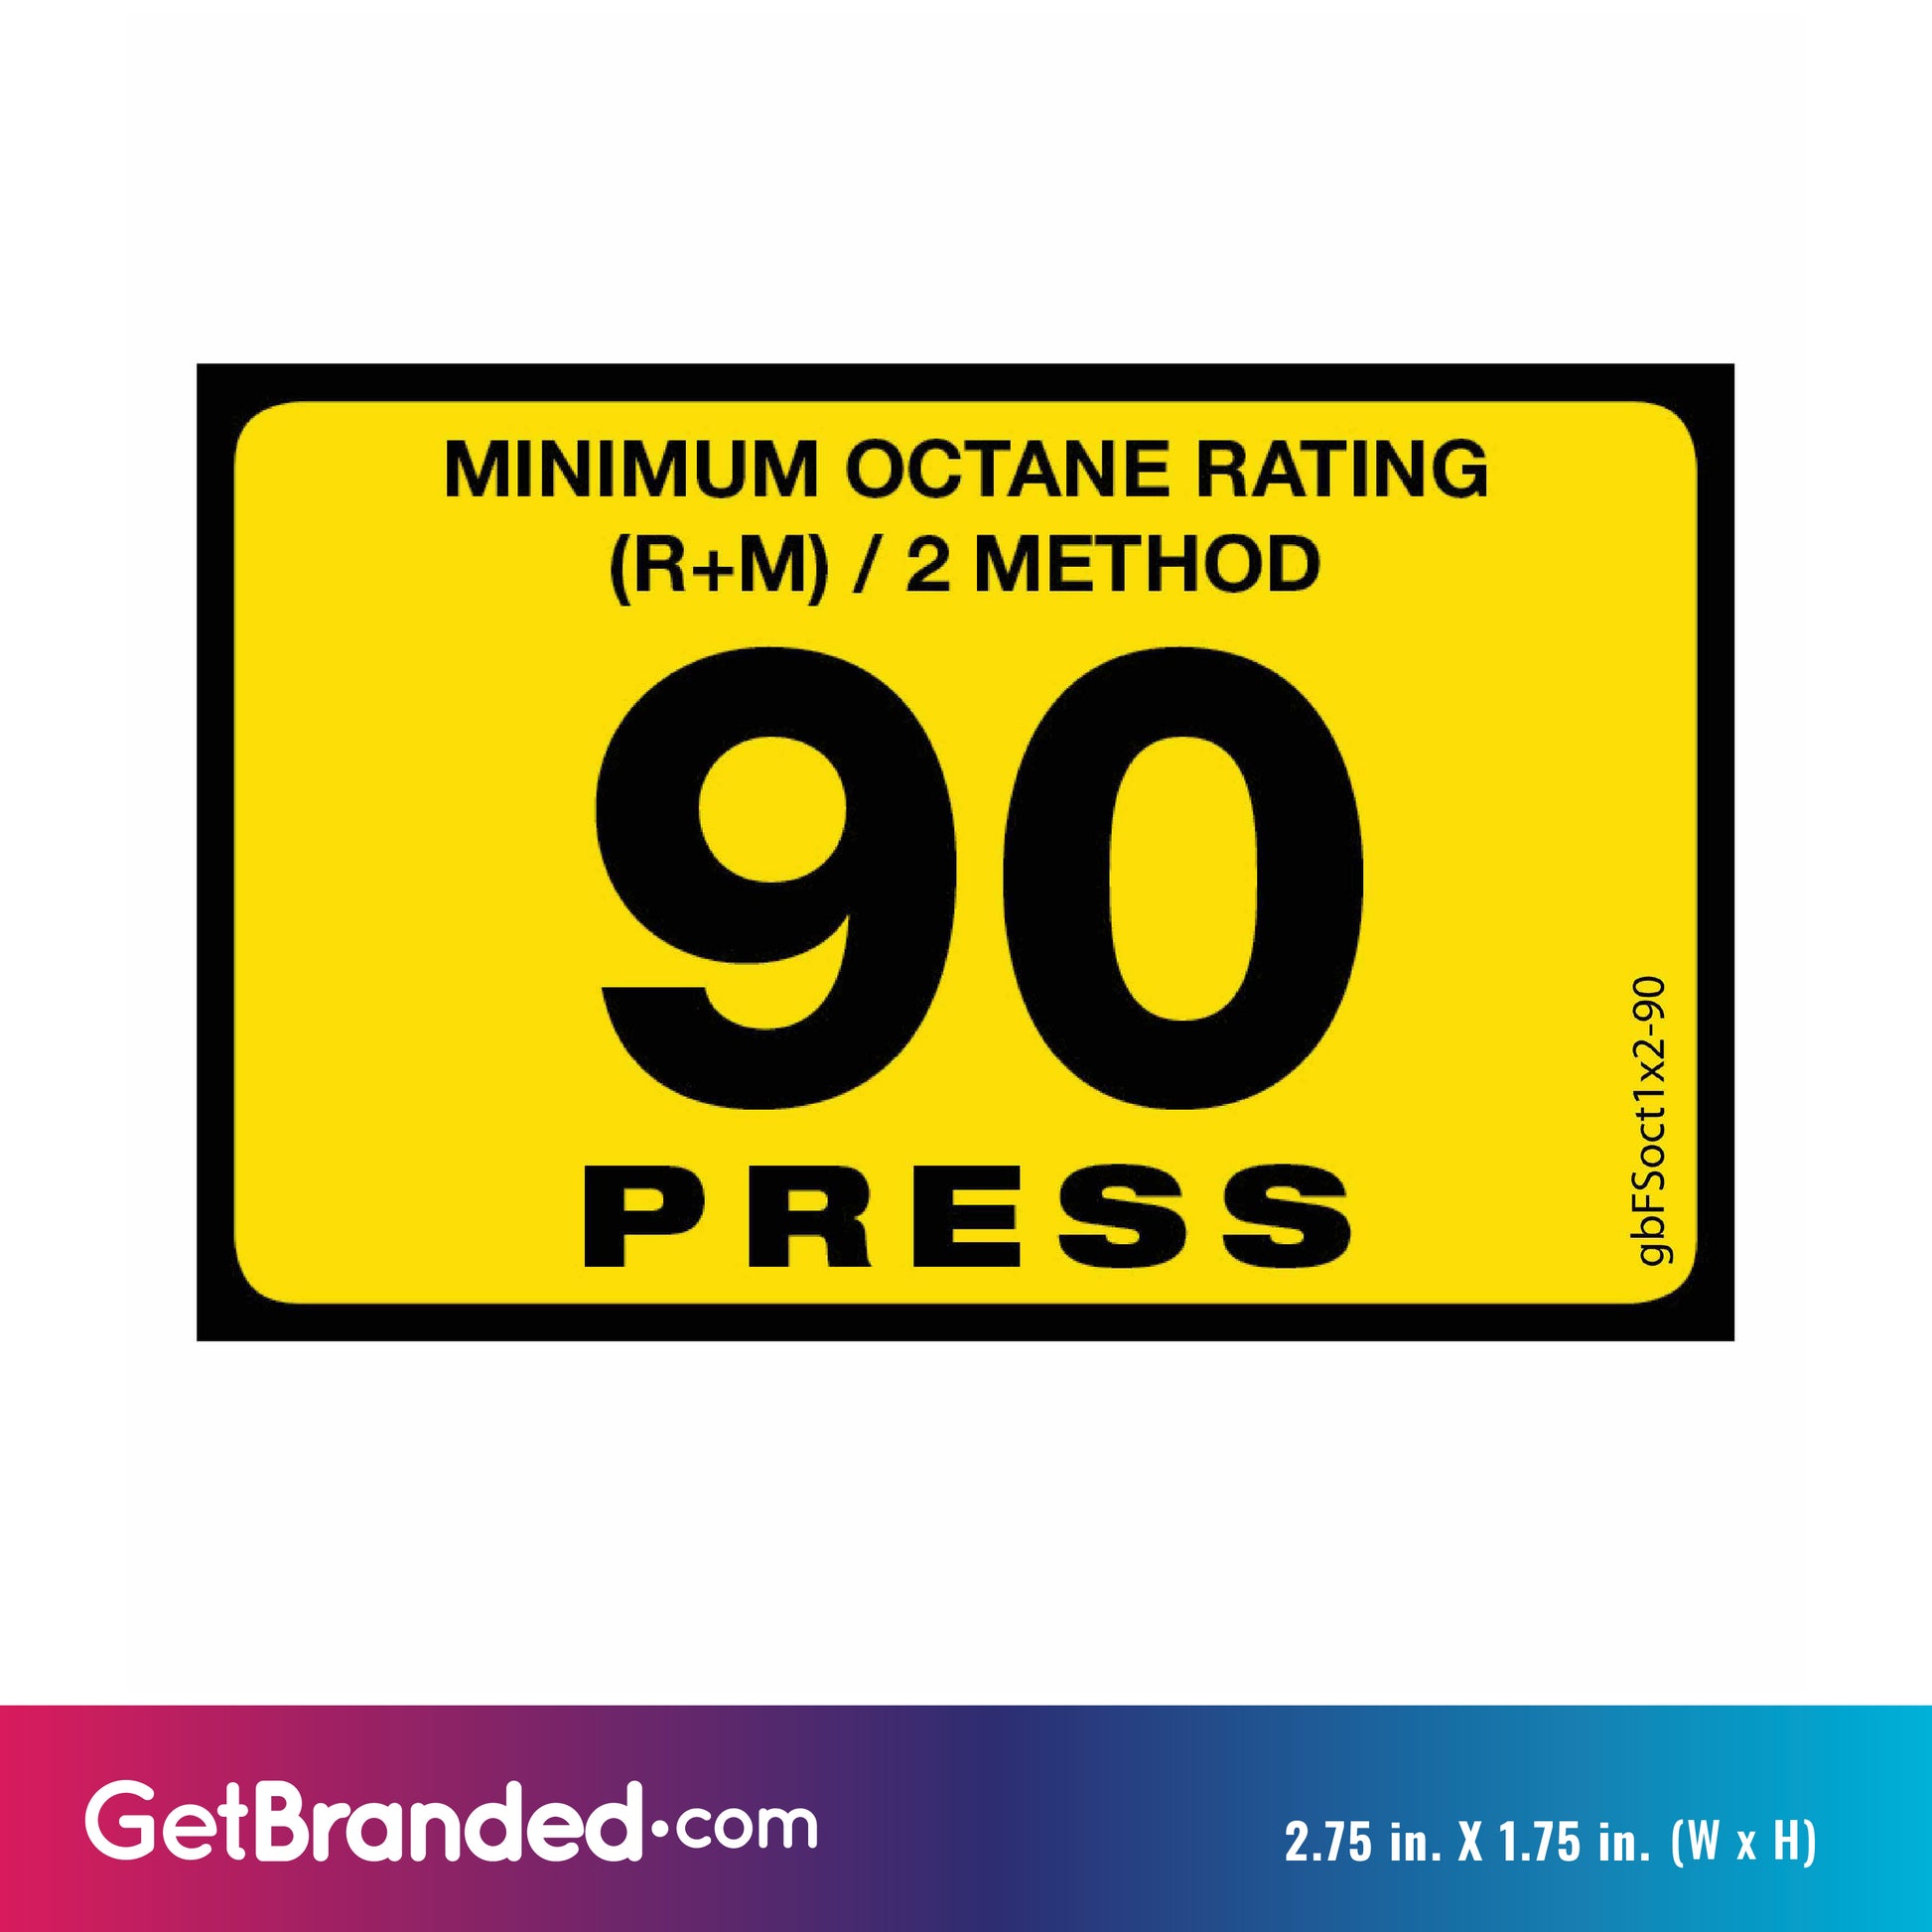 90 Press Octane Rating Decal. 1 inch by 2 inches size guide.